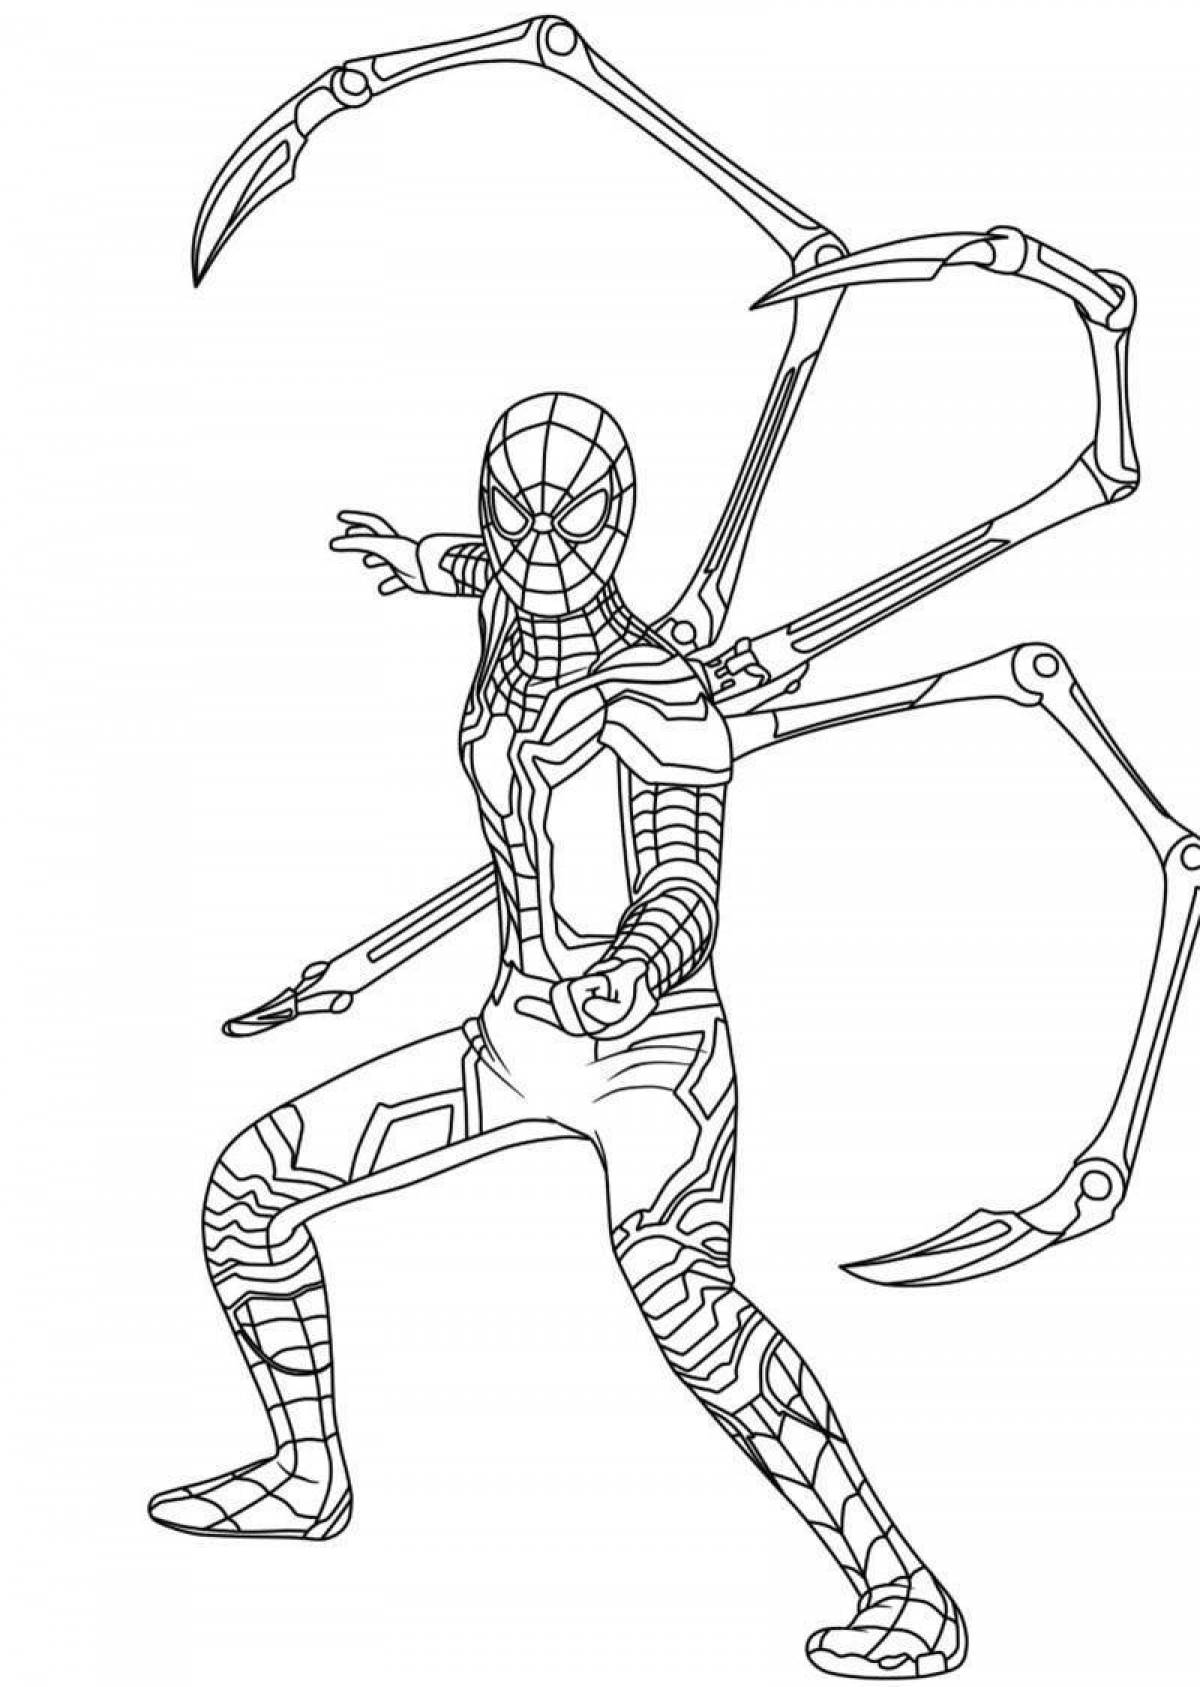 Colorful iron spiderman coloring page